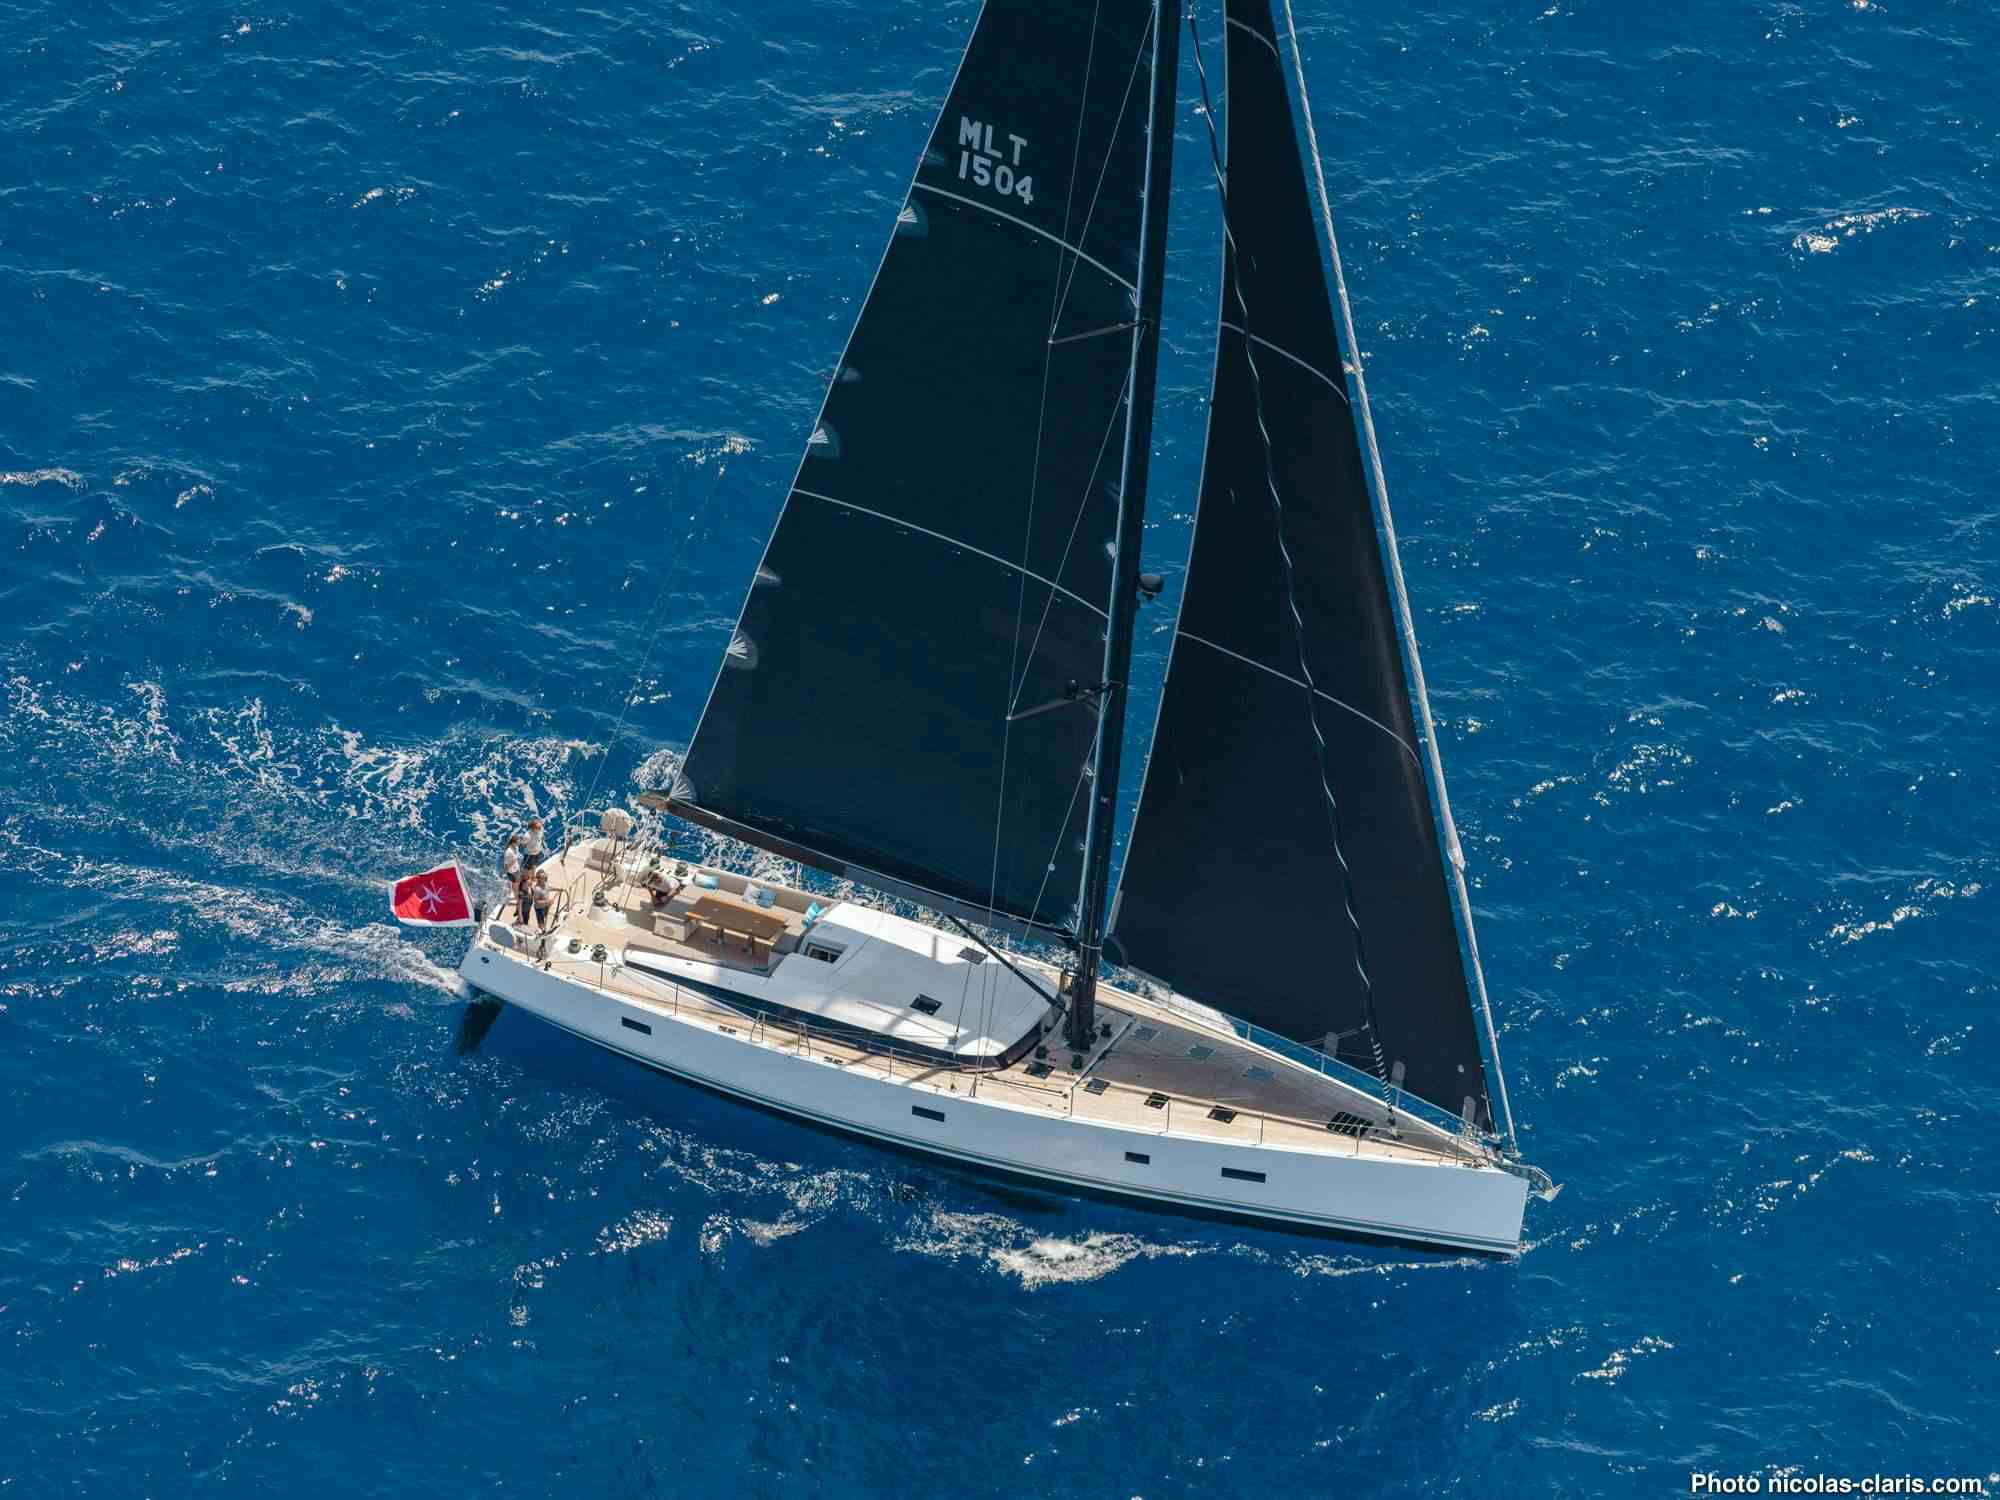 CNB76 2021 - Sailboat Charter Martinique & Boat hire in Caribbean 1